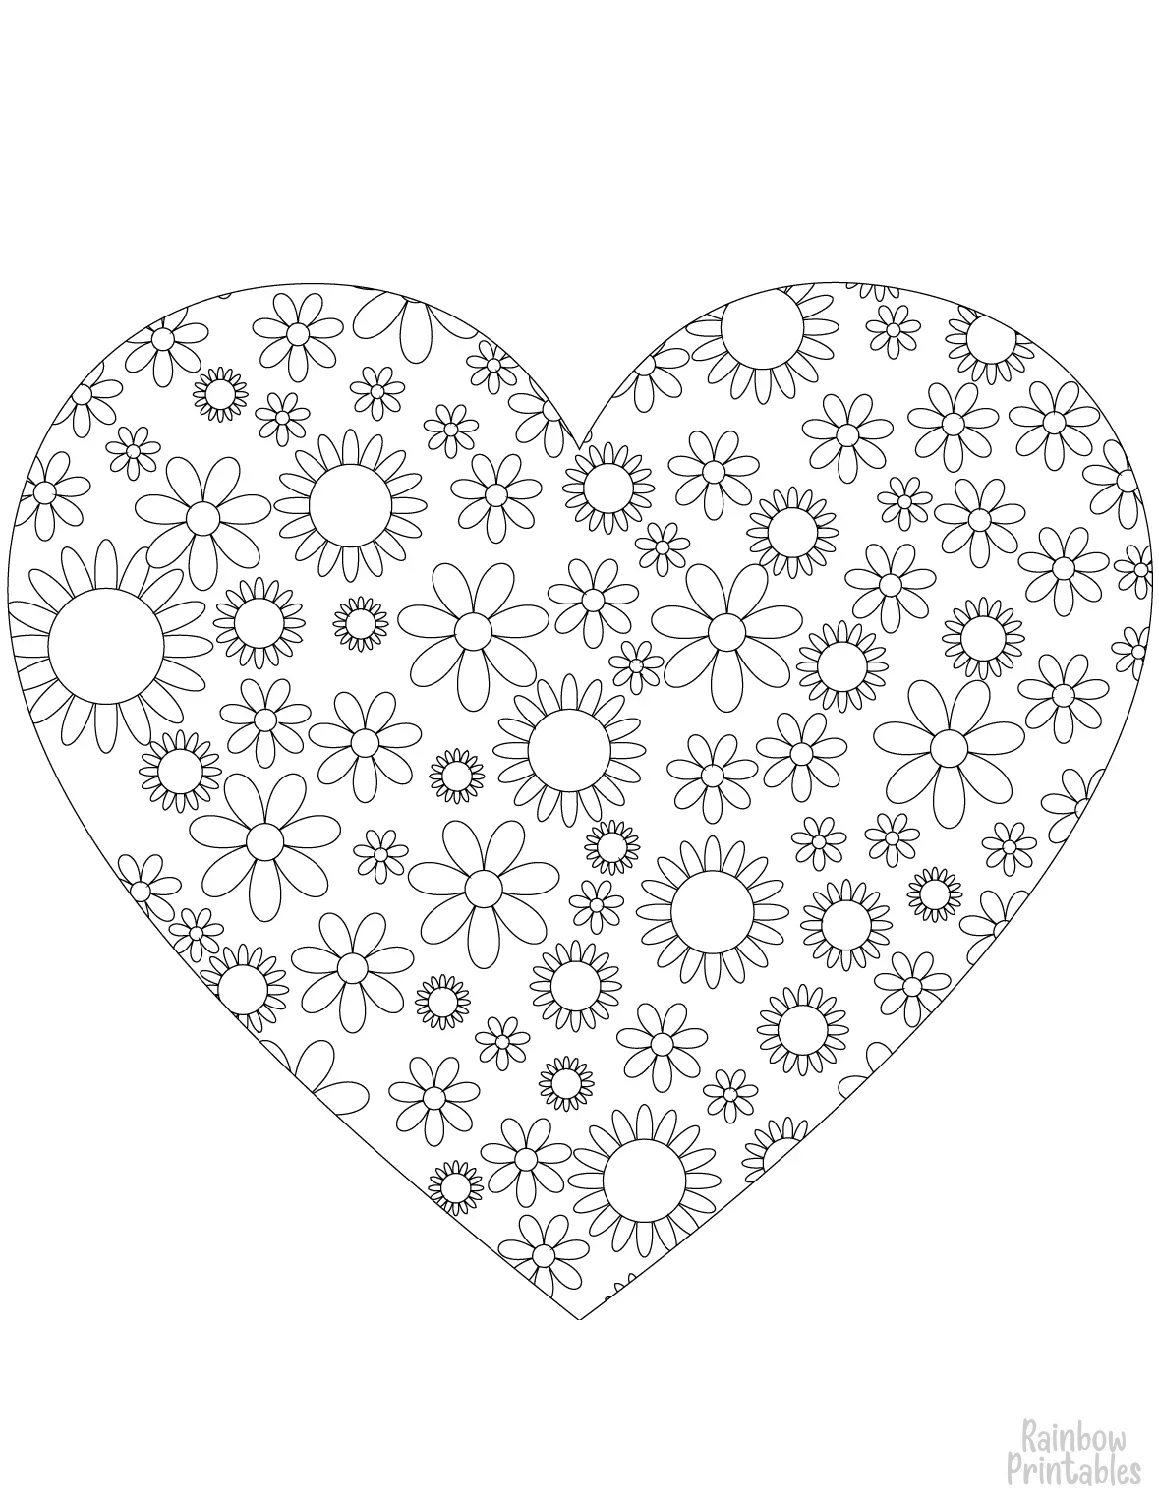 Free Valentine Heart Flowers Zentagle Mandala Coloring Pages for Kids Adults Art Activities Line Art